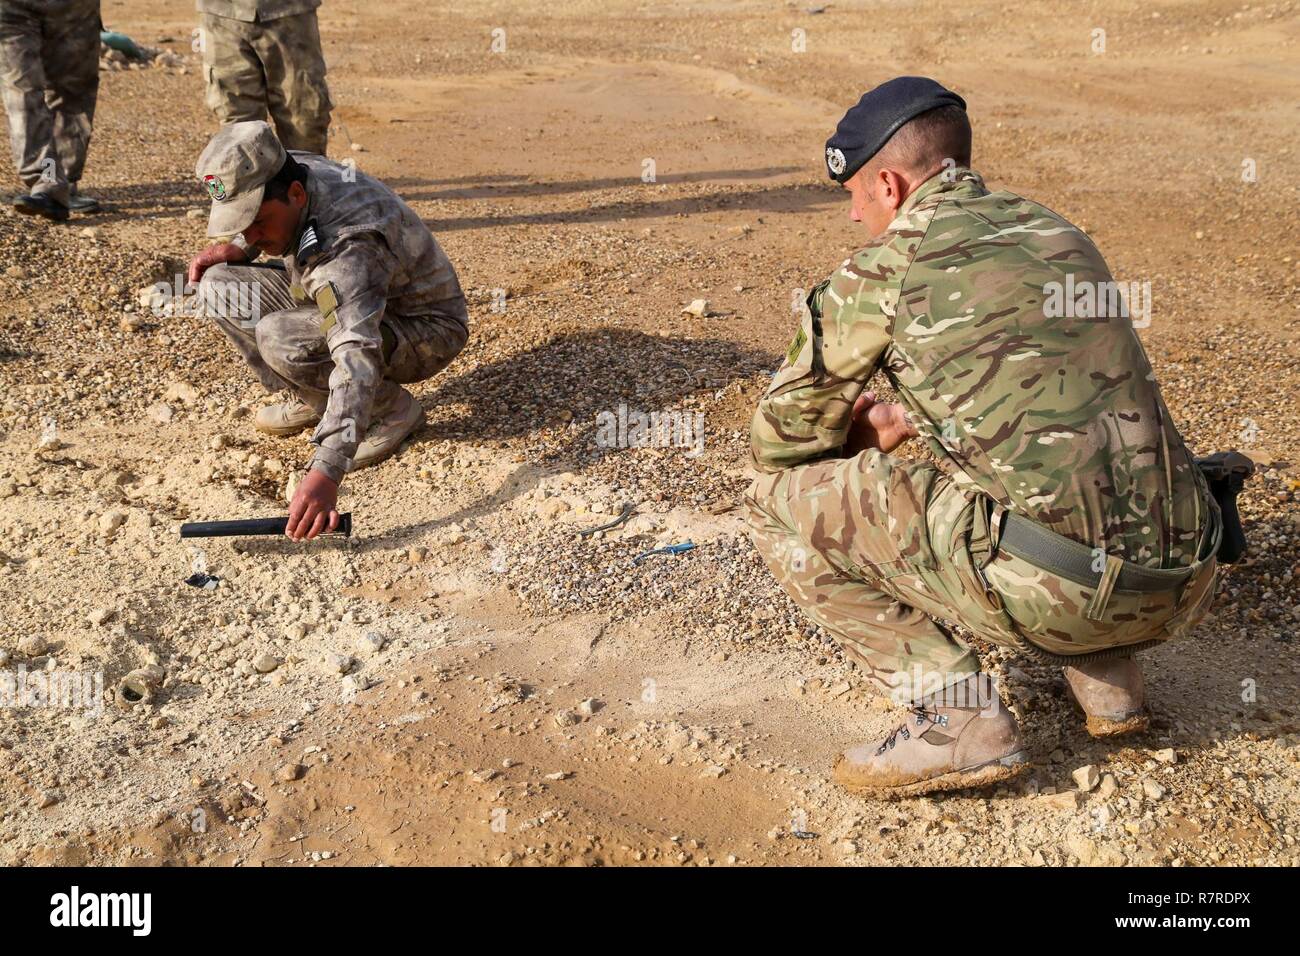 An Iraqi security forces soldier scans for hidden improvised explosive devices under the guidance of a British trainer, deployed in support of Combined Joint Task Force – Operation Inherent Resolve, during counter-IED training at Al Asad Air Base, Iraq, March 29, 2017. This training is part of the overall CJTF- OIR building partner capacity mission by training and improving the capability of partnered forces fighting ISIS. CJTF-OIR is the global Coalition to defeat ISIS in Iraq and Syria. Stock Photo